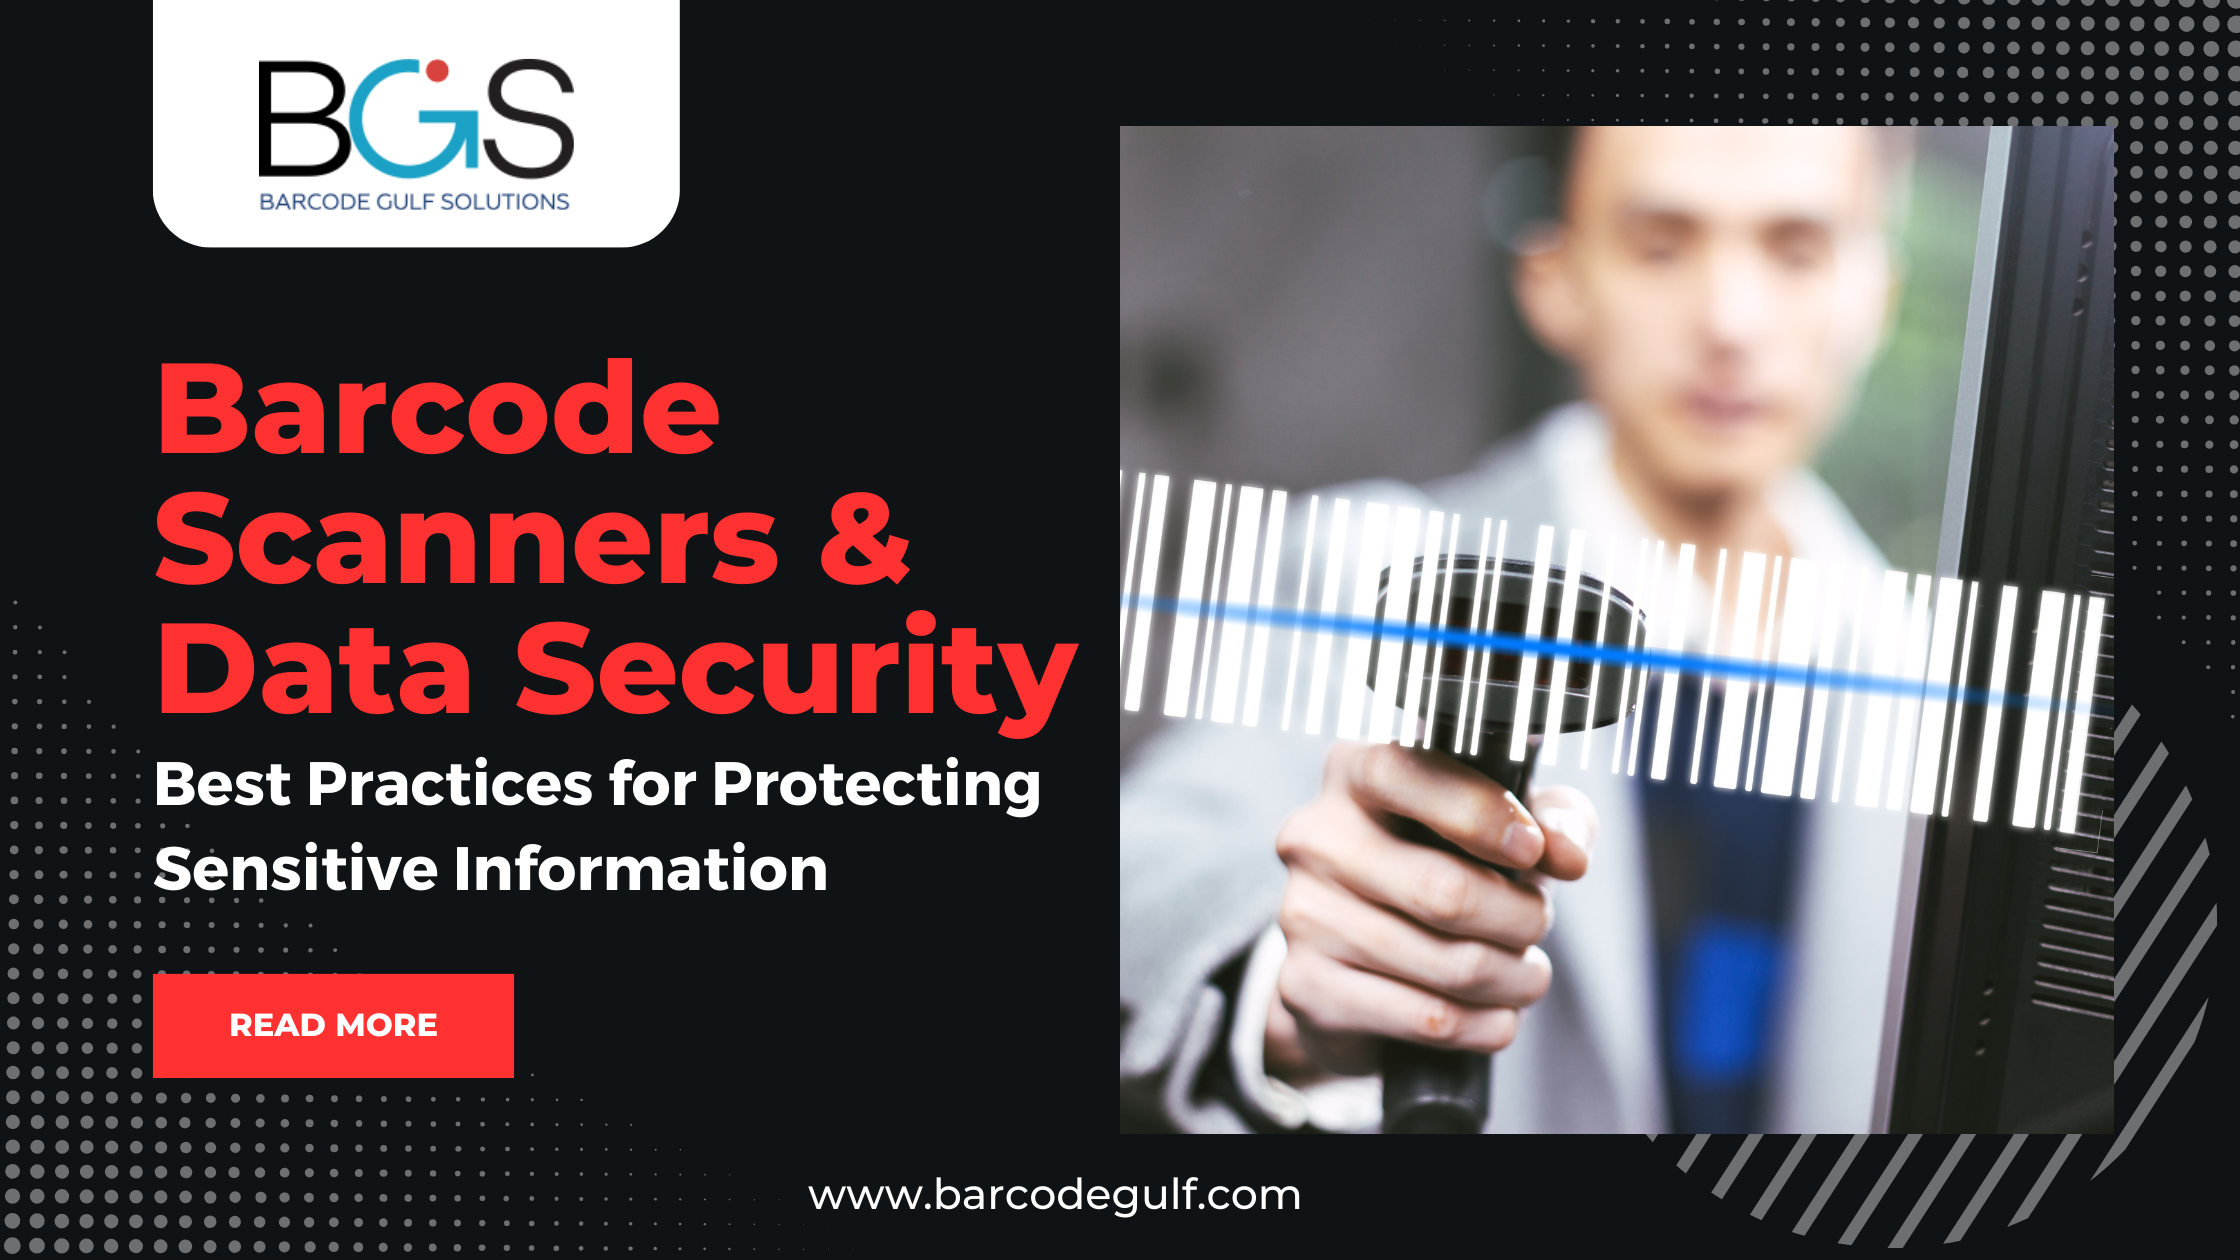 Barcode-scanner-and-Data-security-for-Protecting-Sensitive-Information-Barcodegulf